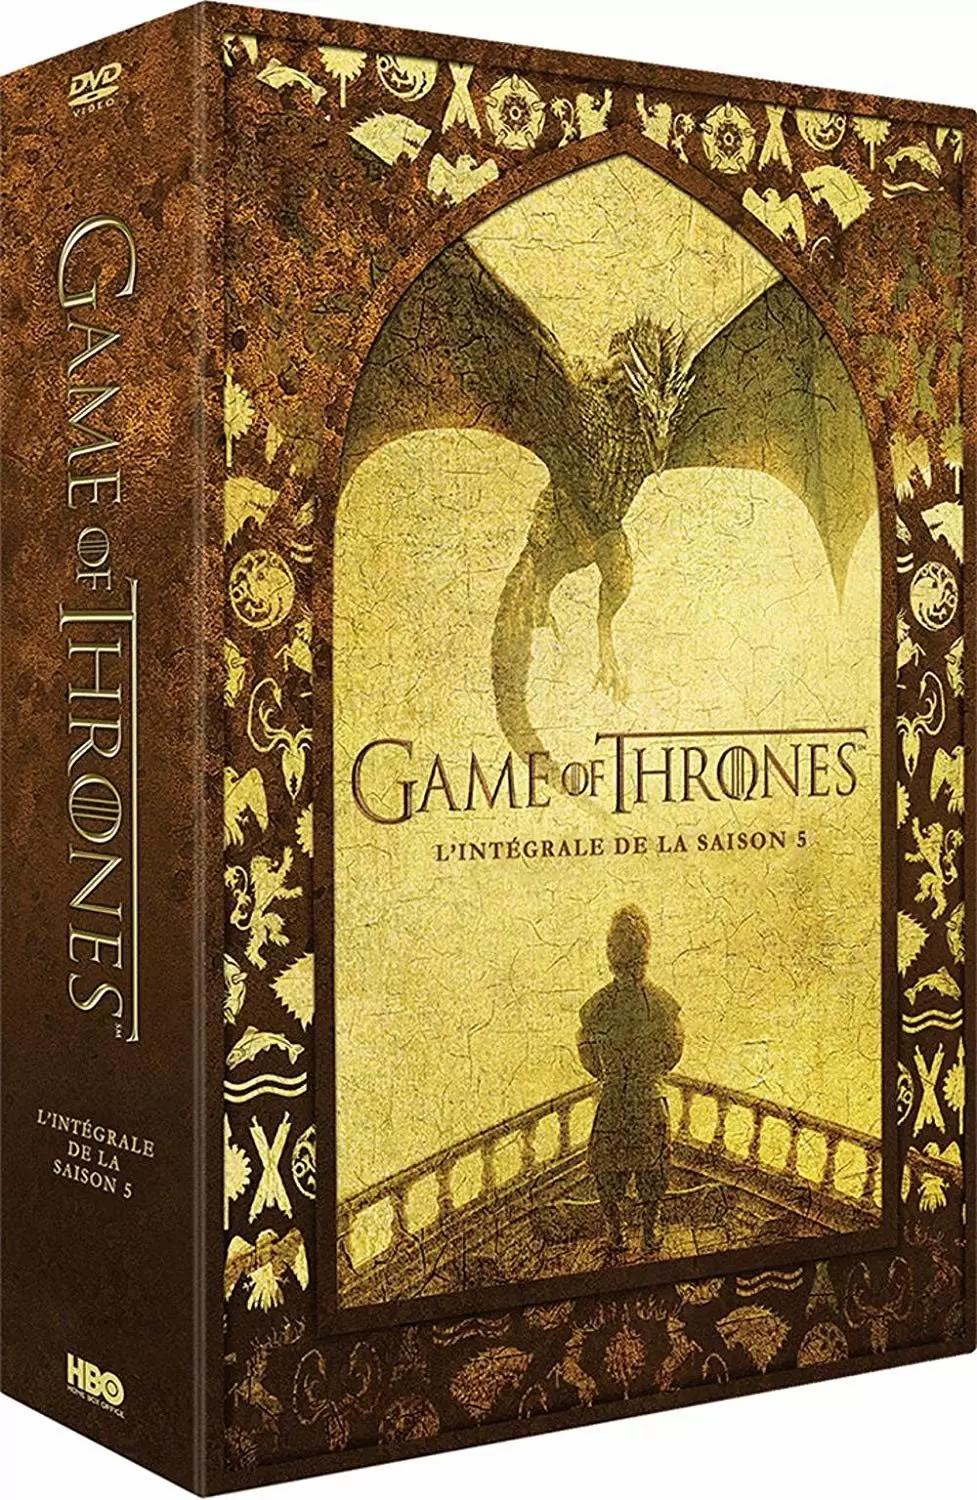 Game of Thrones - Game of Thrones - saison 5 (DVD)